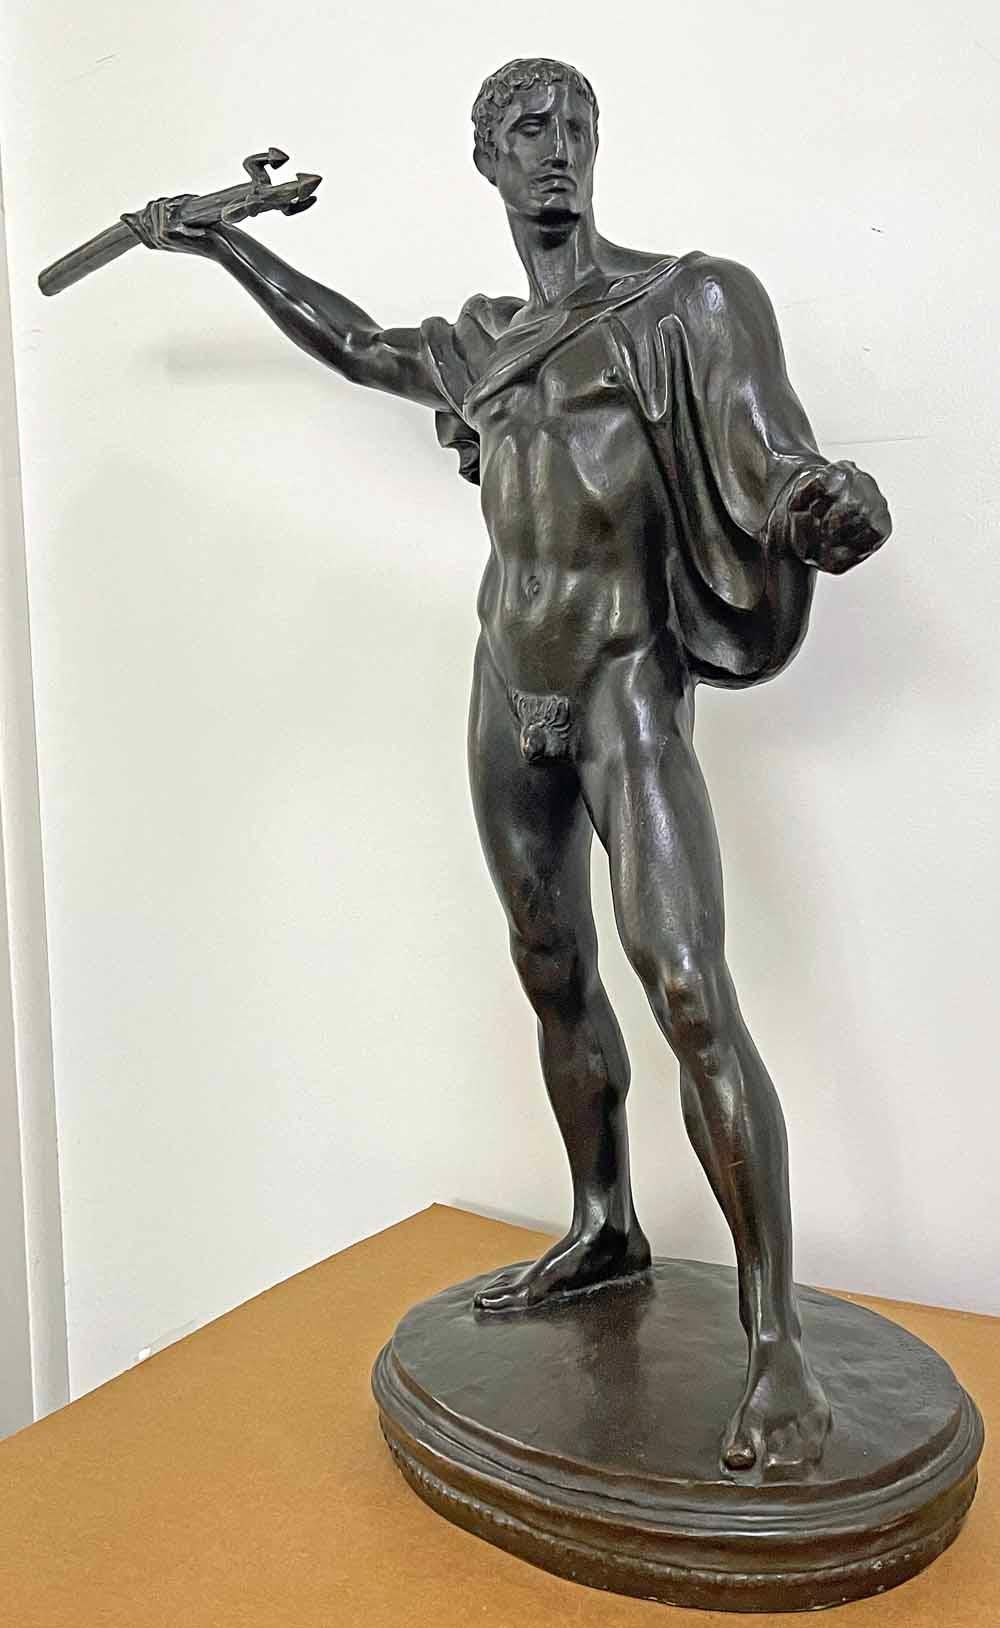 At once strong and sensuous, this large bronze of a fully nude triton figure, his right arm raised high with his trident, ready to strike, was sculpted in the 1920s by Hubert Netzer.  This figure -- a creature of the sea and a companion to Neptune